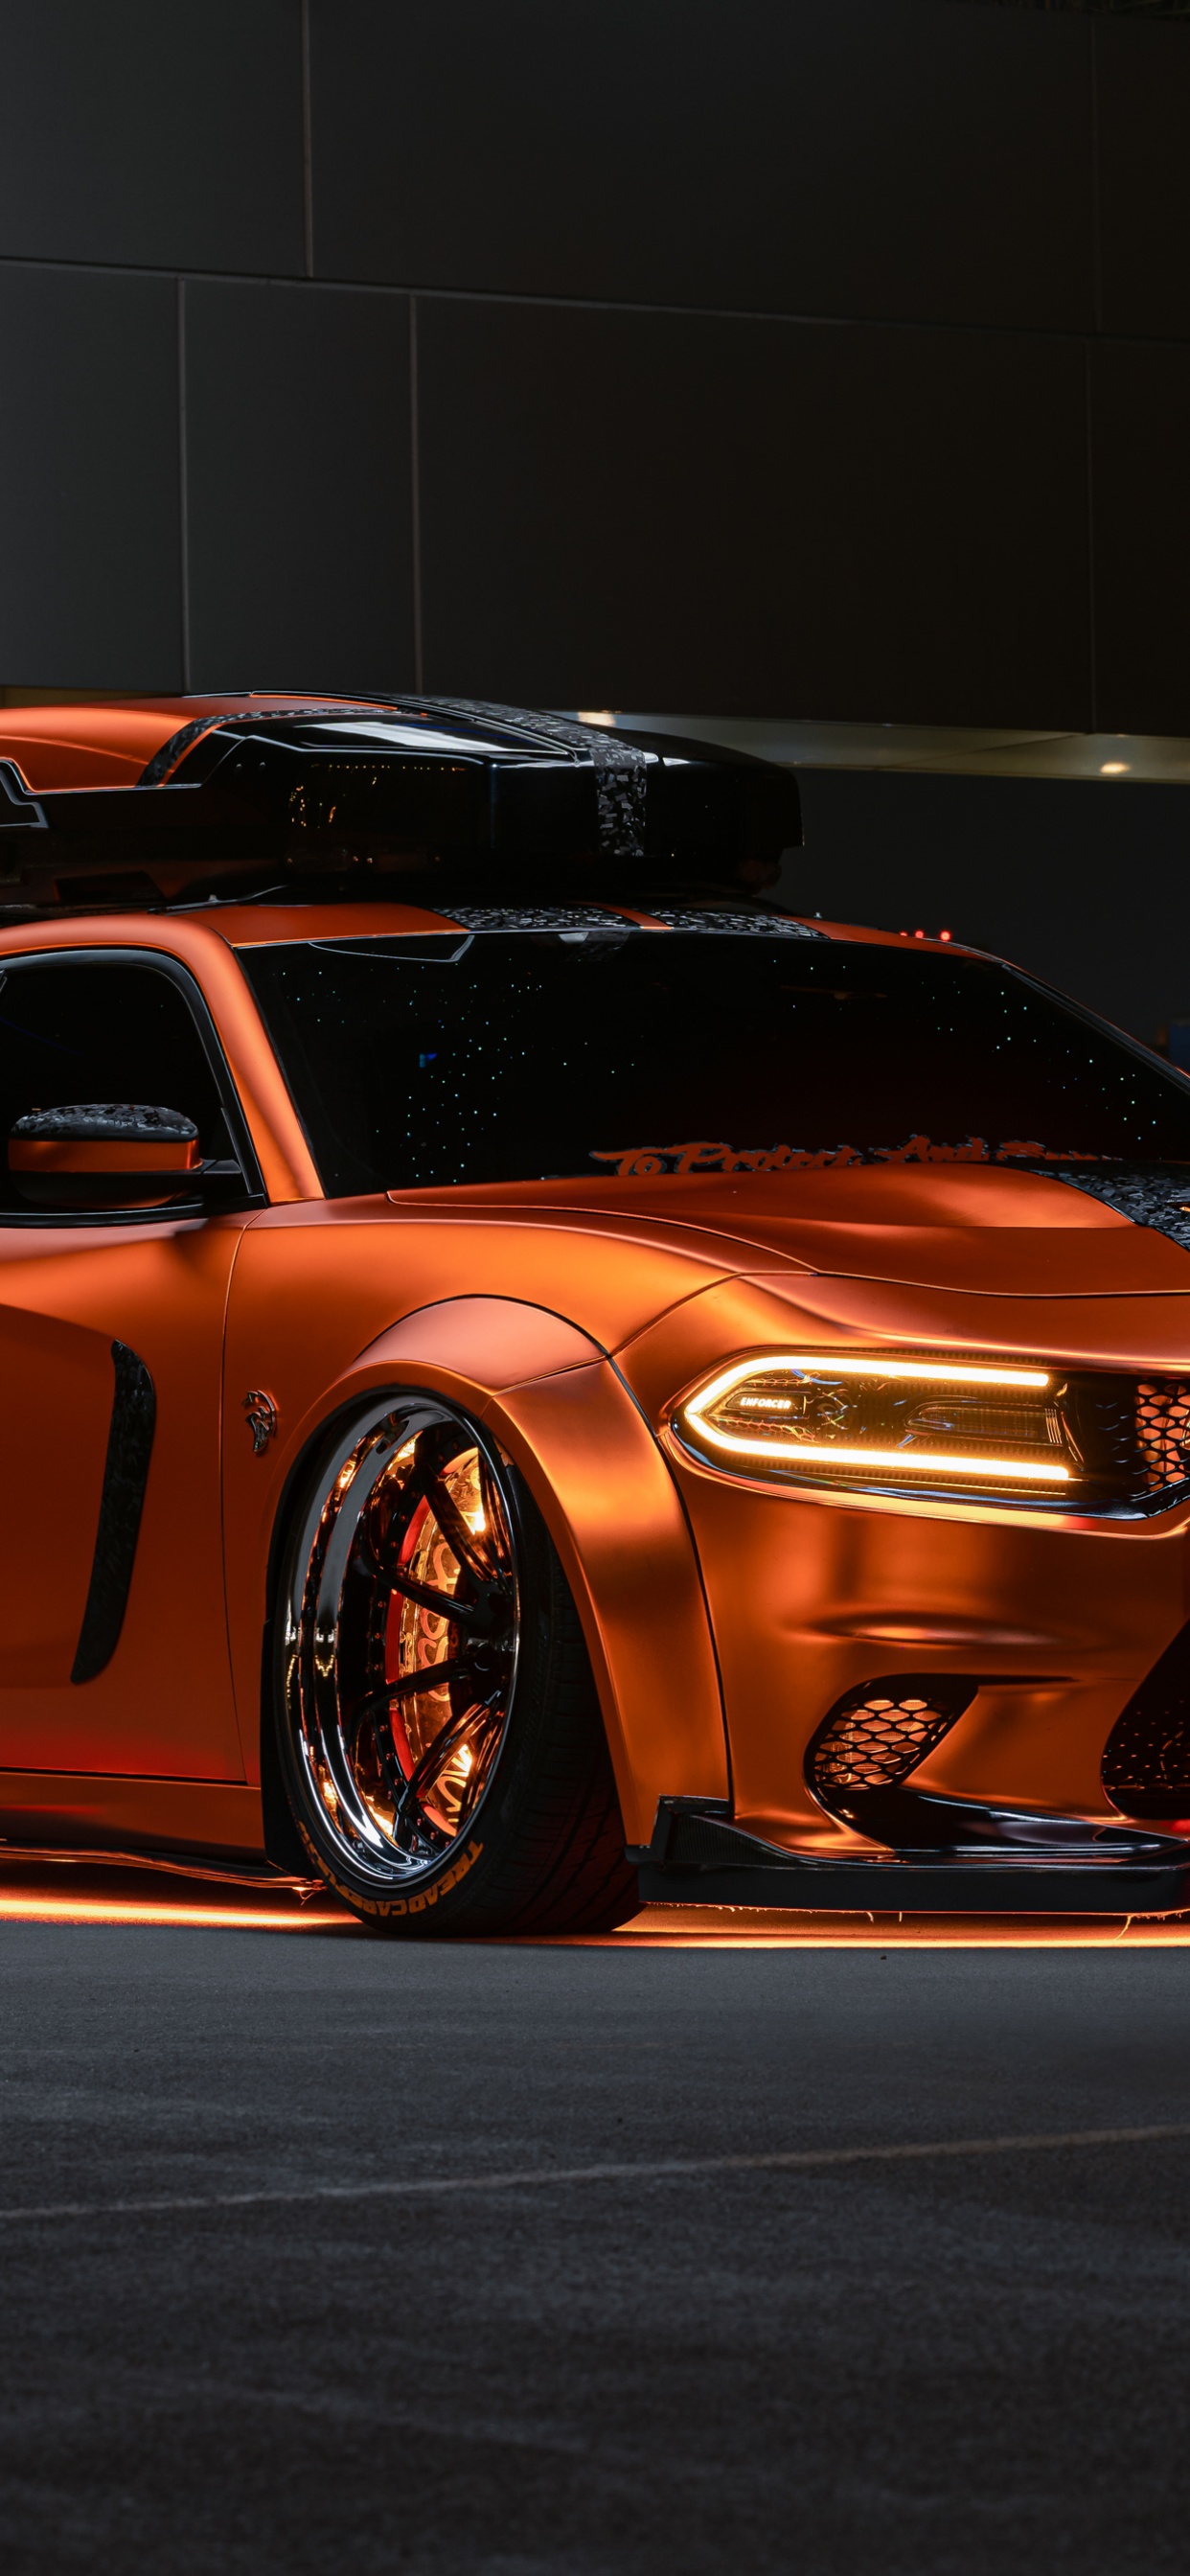 Free download 68 Charger Hellcat Wallpapers on WallpaperPlay 2560x1440  for your Desktop Mobile  Tablet  Explore 32 Dodge Charger Hellcat  Wallpapers  Dodge Charger Wallpaper Dodge Charger Hellcat Wallpaper  Dodge Hellcat Wallpaper